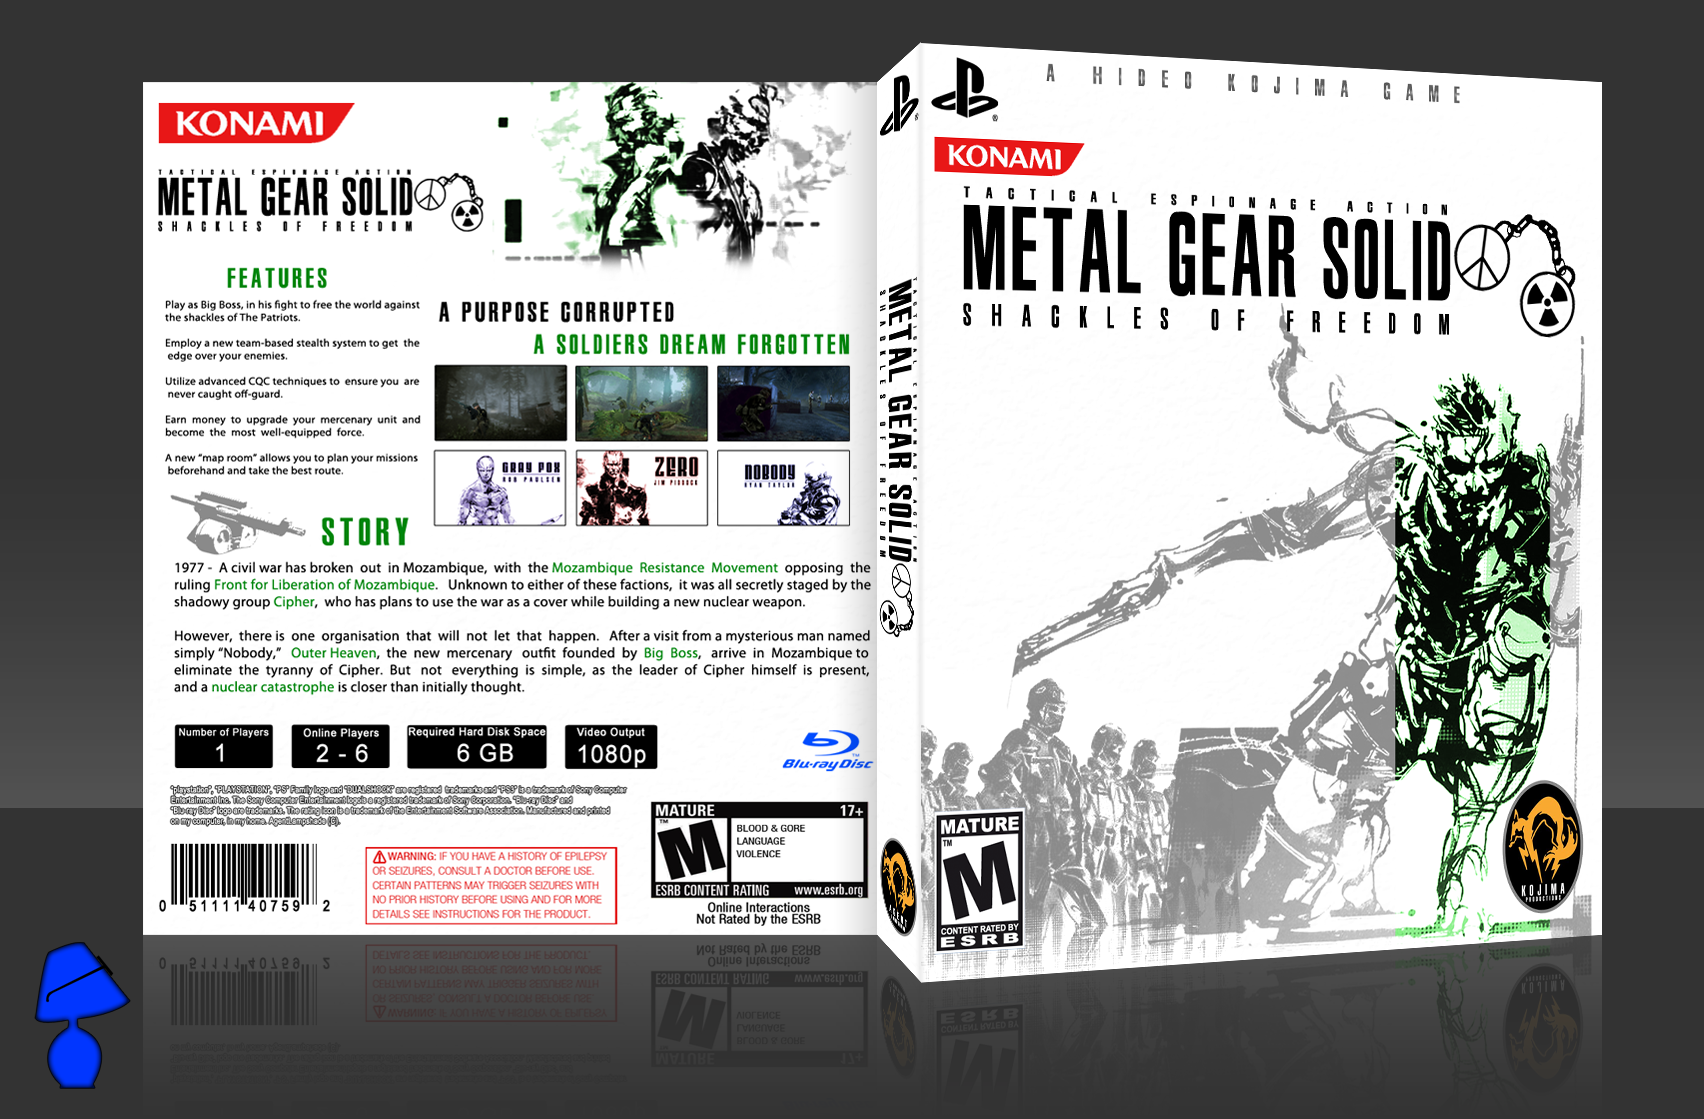 Metal Gear Solid: Shackles of Freedom box cover